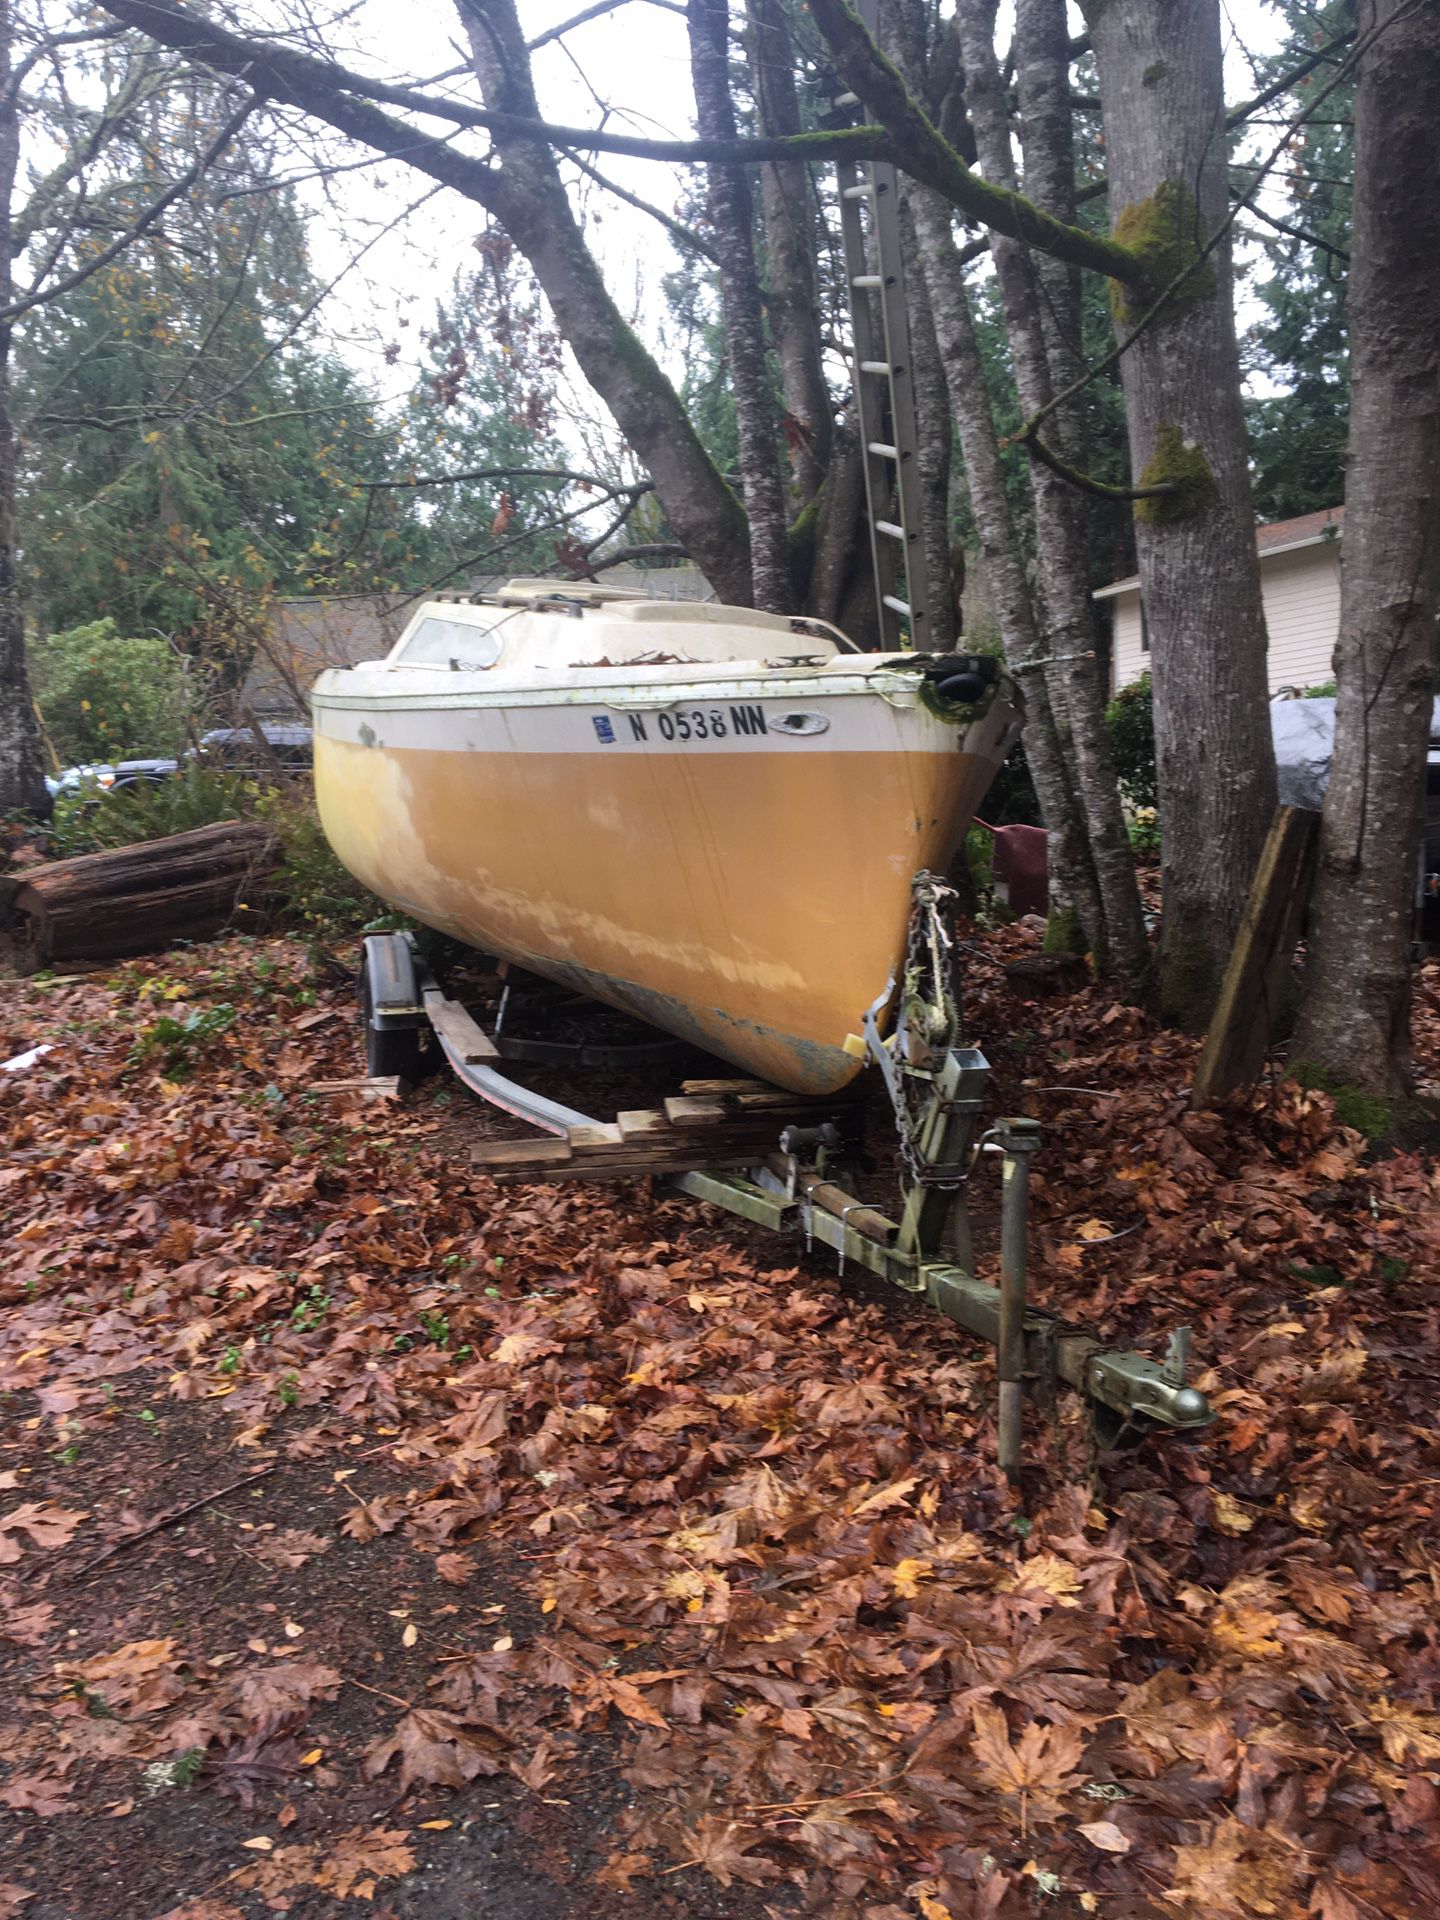 Free Boat And Trailer With Papers